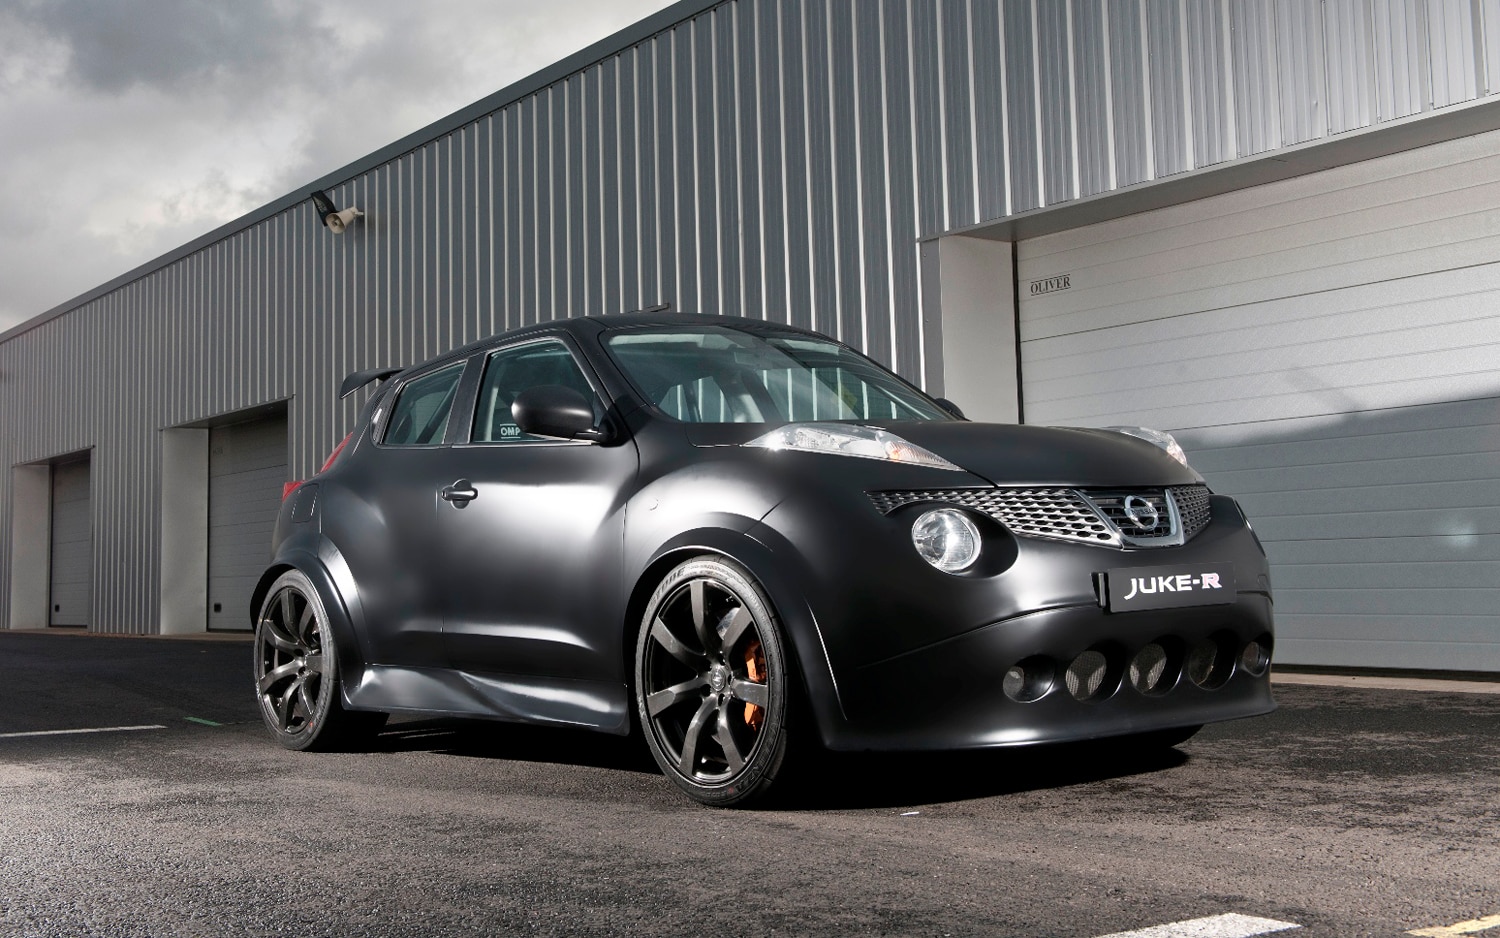 Juke-R Specs Revealed, Nissan Claims World's Fastest Crossover: 0-62 MPH in  3.7 Seconds